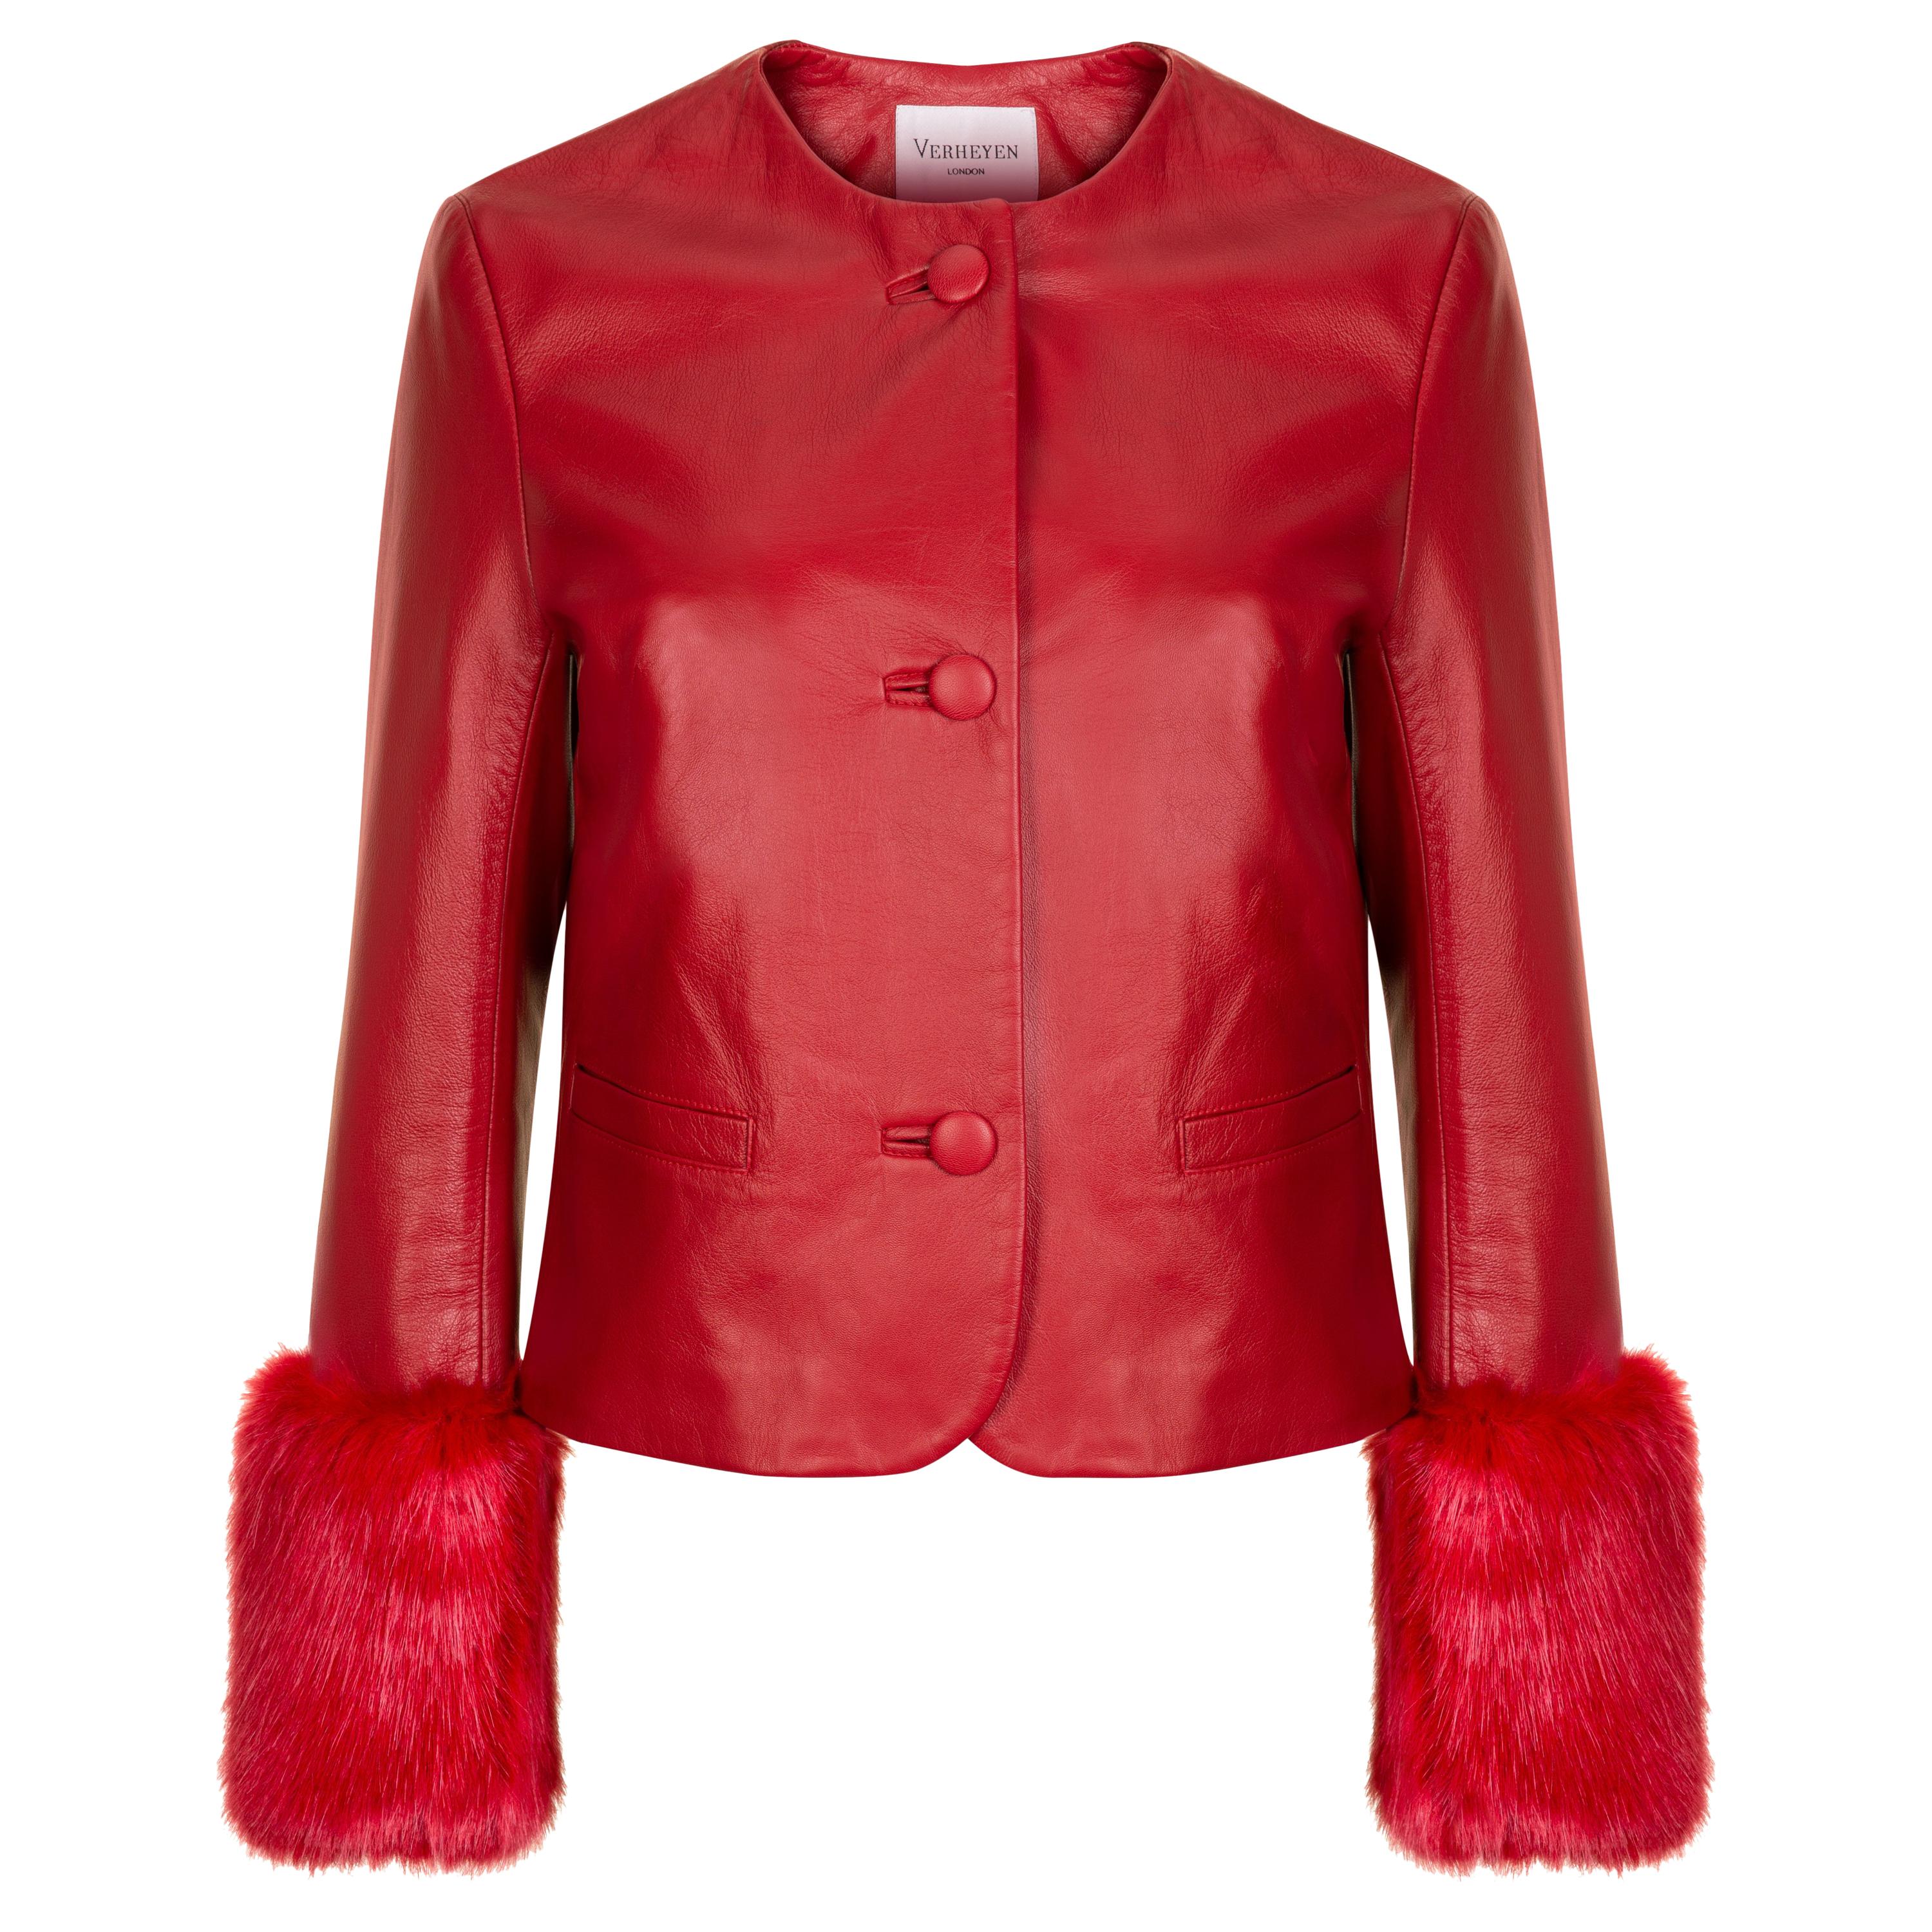 Verheyen Vita Cropped Jacket in Red Leather with Faux Fur - Size uk 14